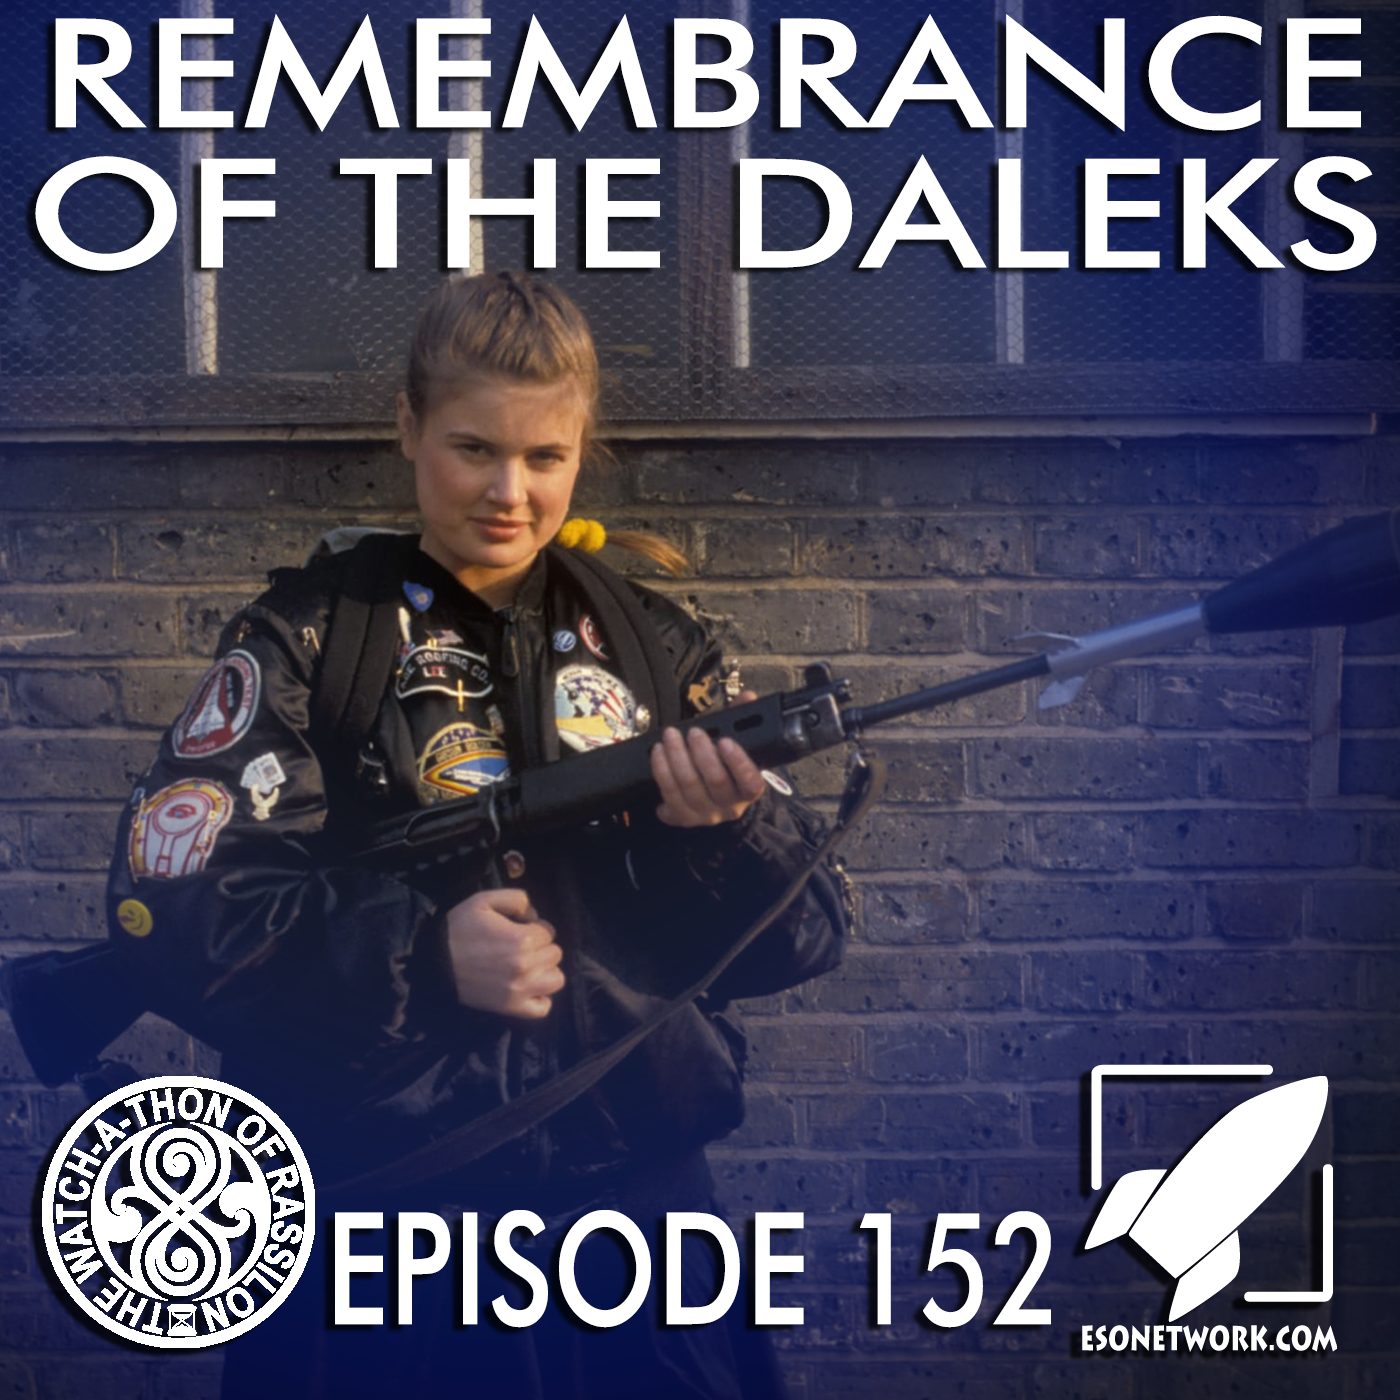 The Watch-A-Thon of Rassilon: Episode 152: Remembrance of the Daleks